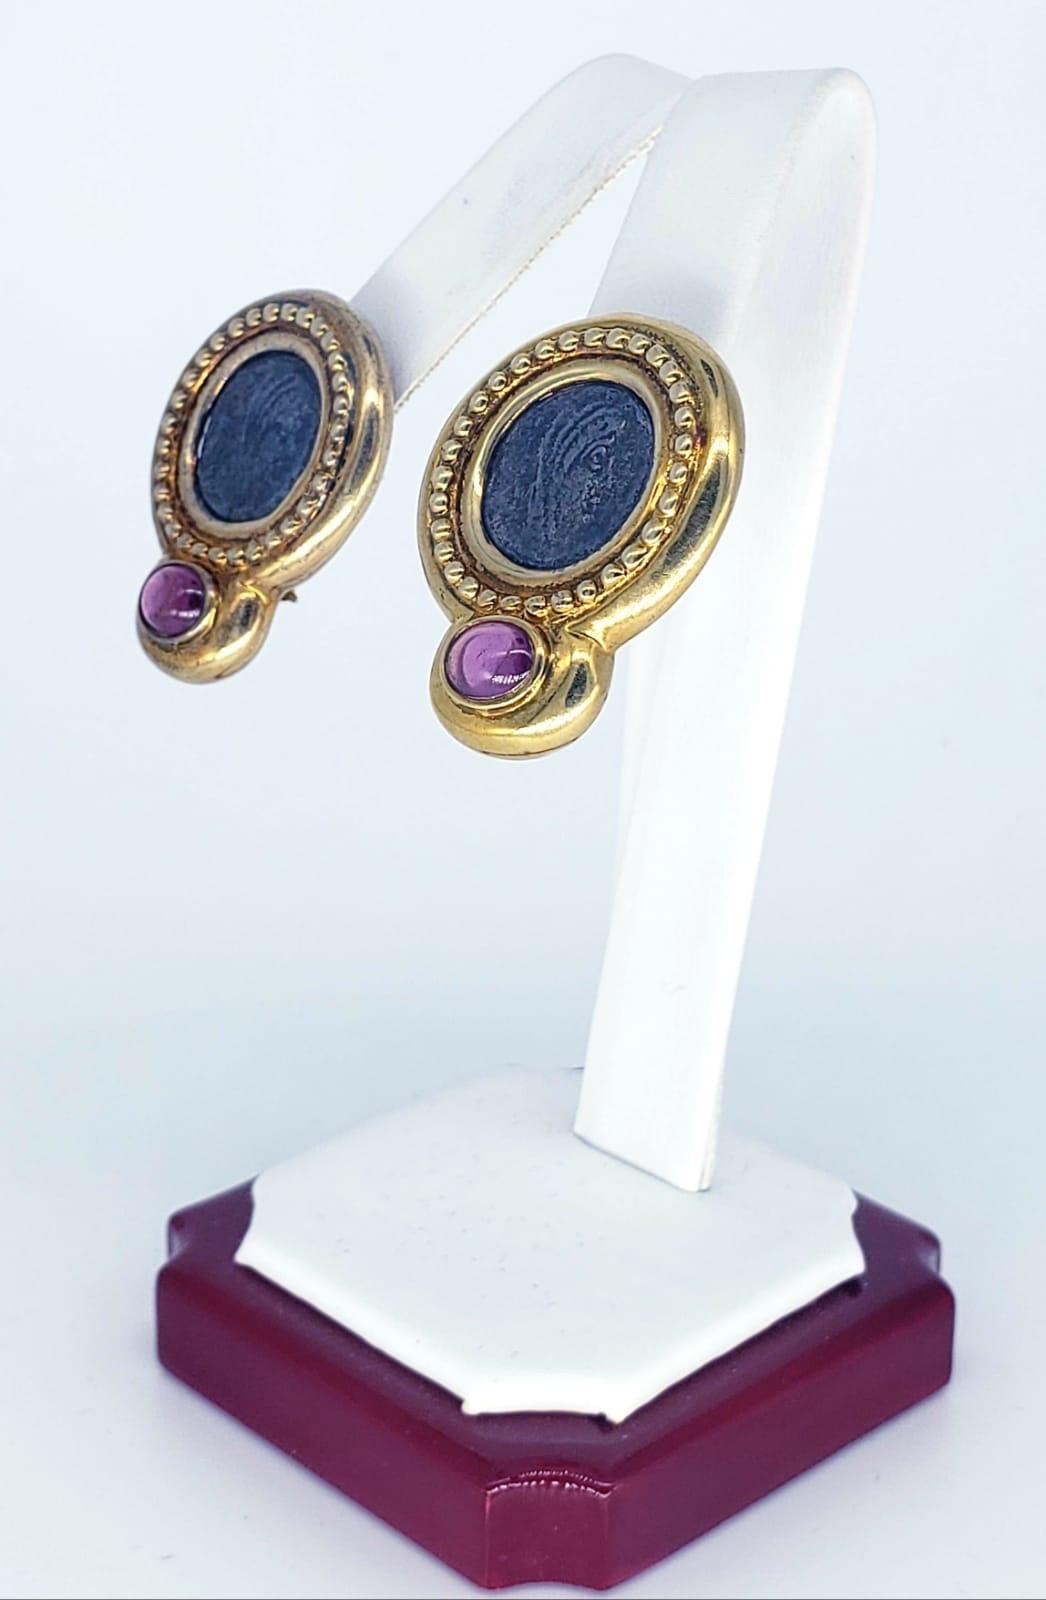 Antique Ancient Roman Coin Sapphire Cabochon Earrings. The earrings measure 24.55 X 31.14mm and approx weight 19.5 grams 14k. The earrings are bold and make a strong statement about Ancient Rome and shows signs of wear.